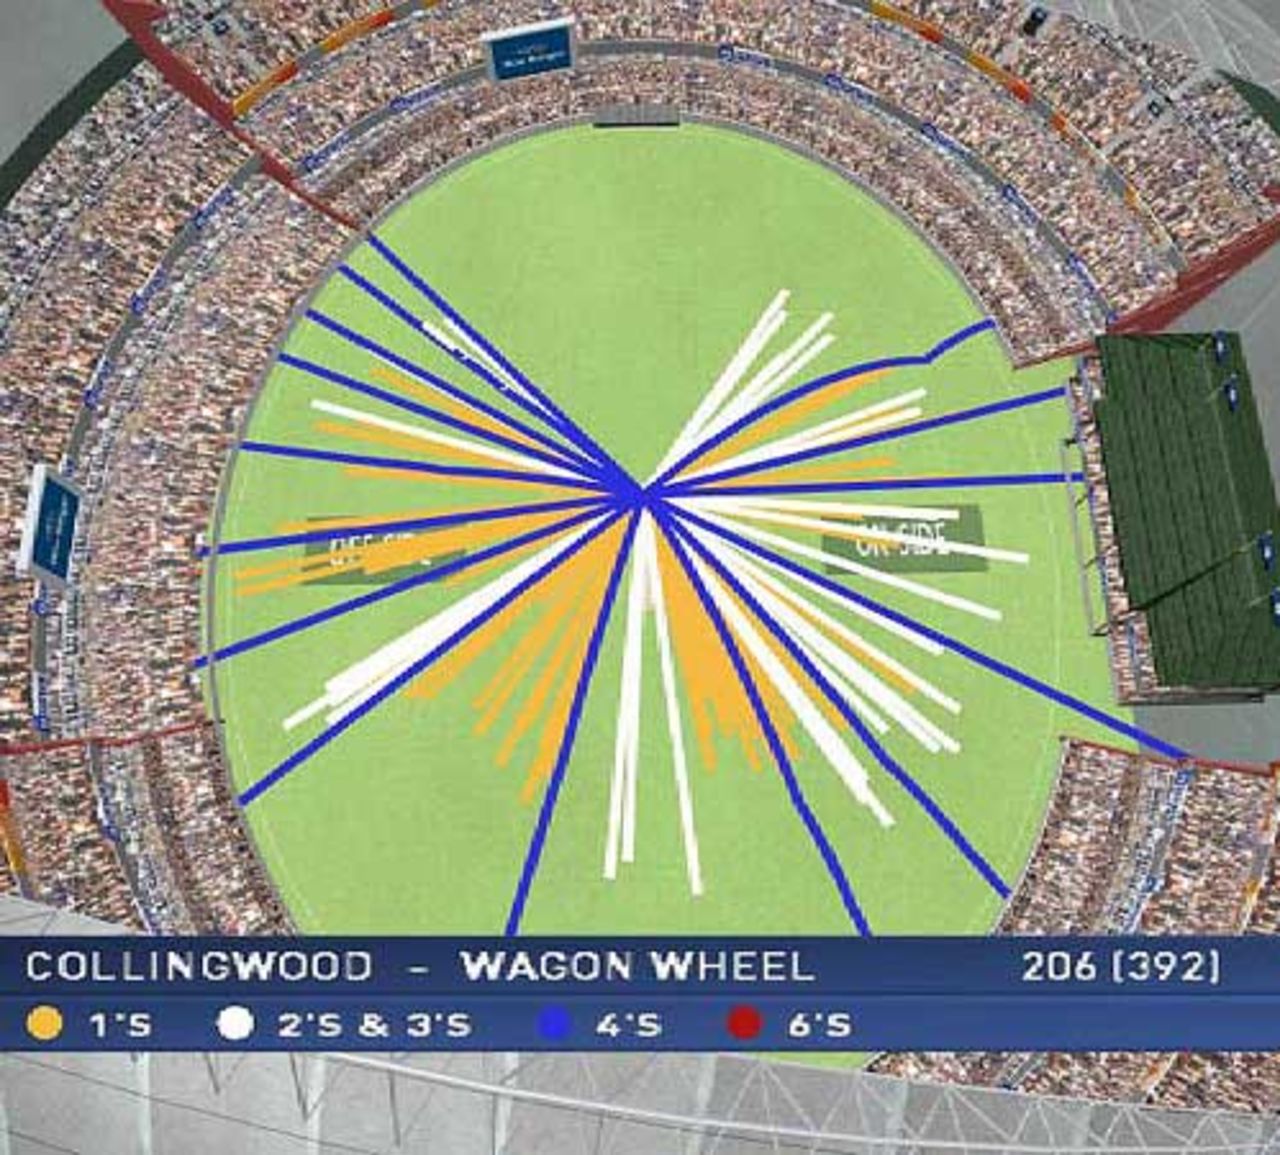 The wagon-wheel for Paul Collingwood's 206, Australia v England, 2nd Test, Adelaide, 2nd day, December 2, 2006